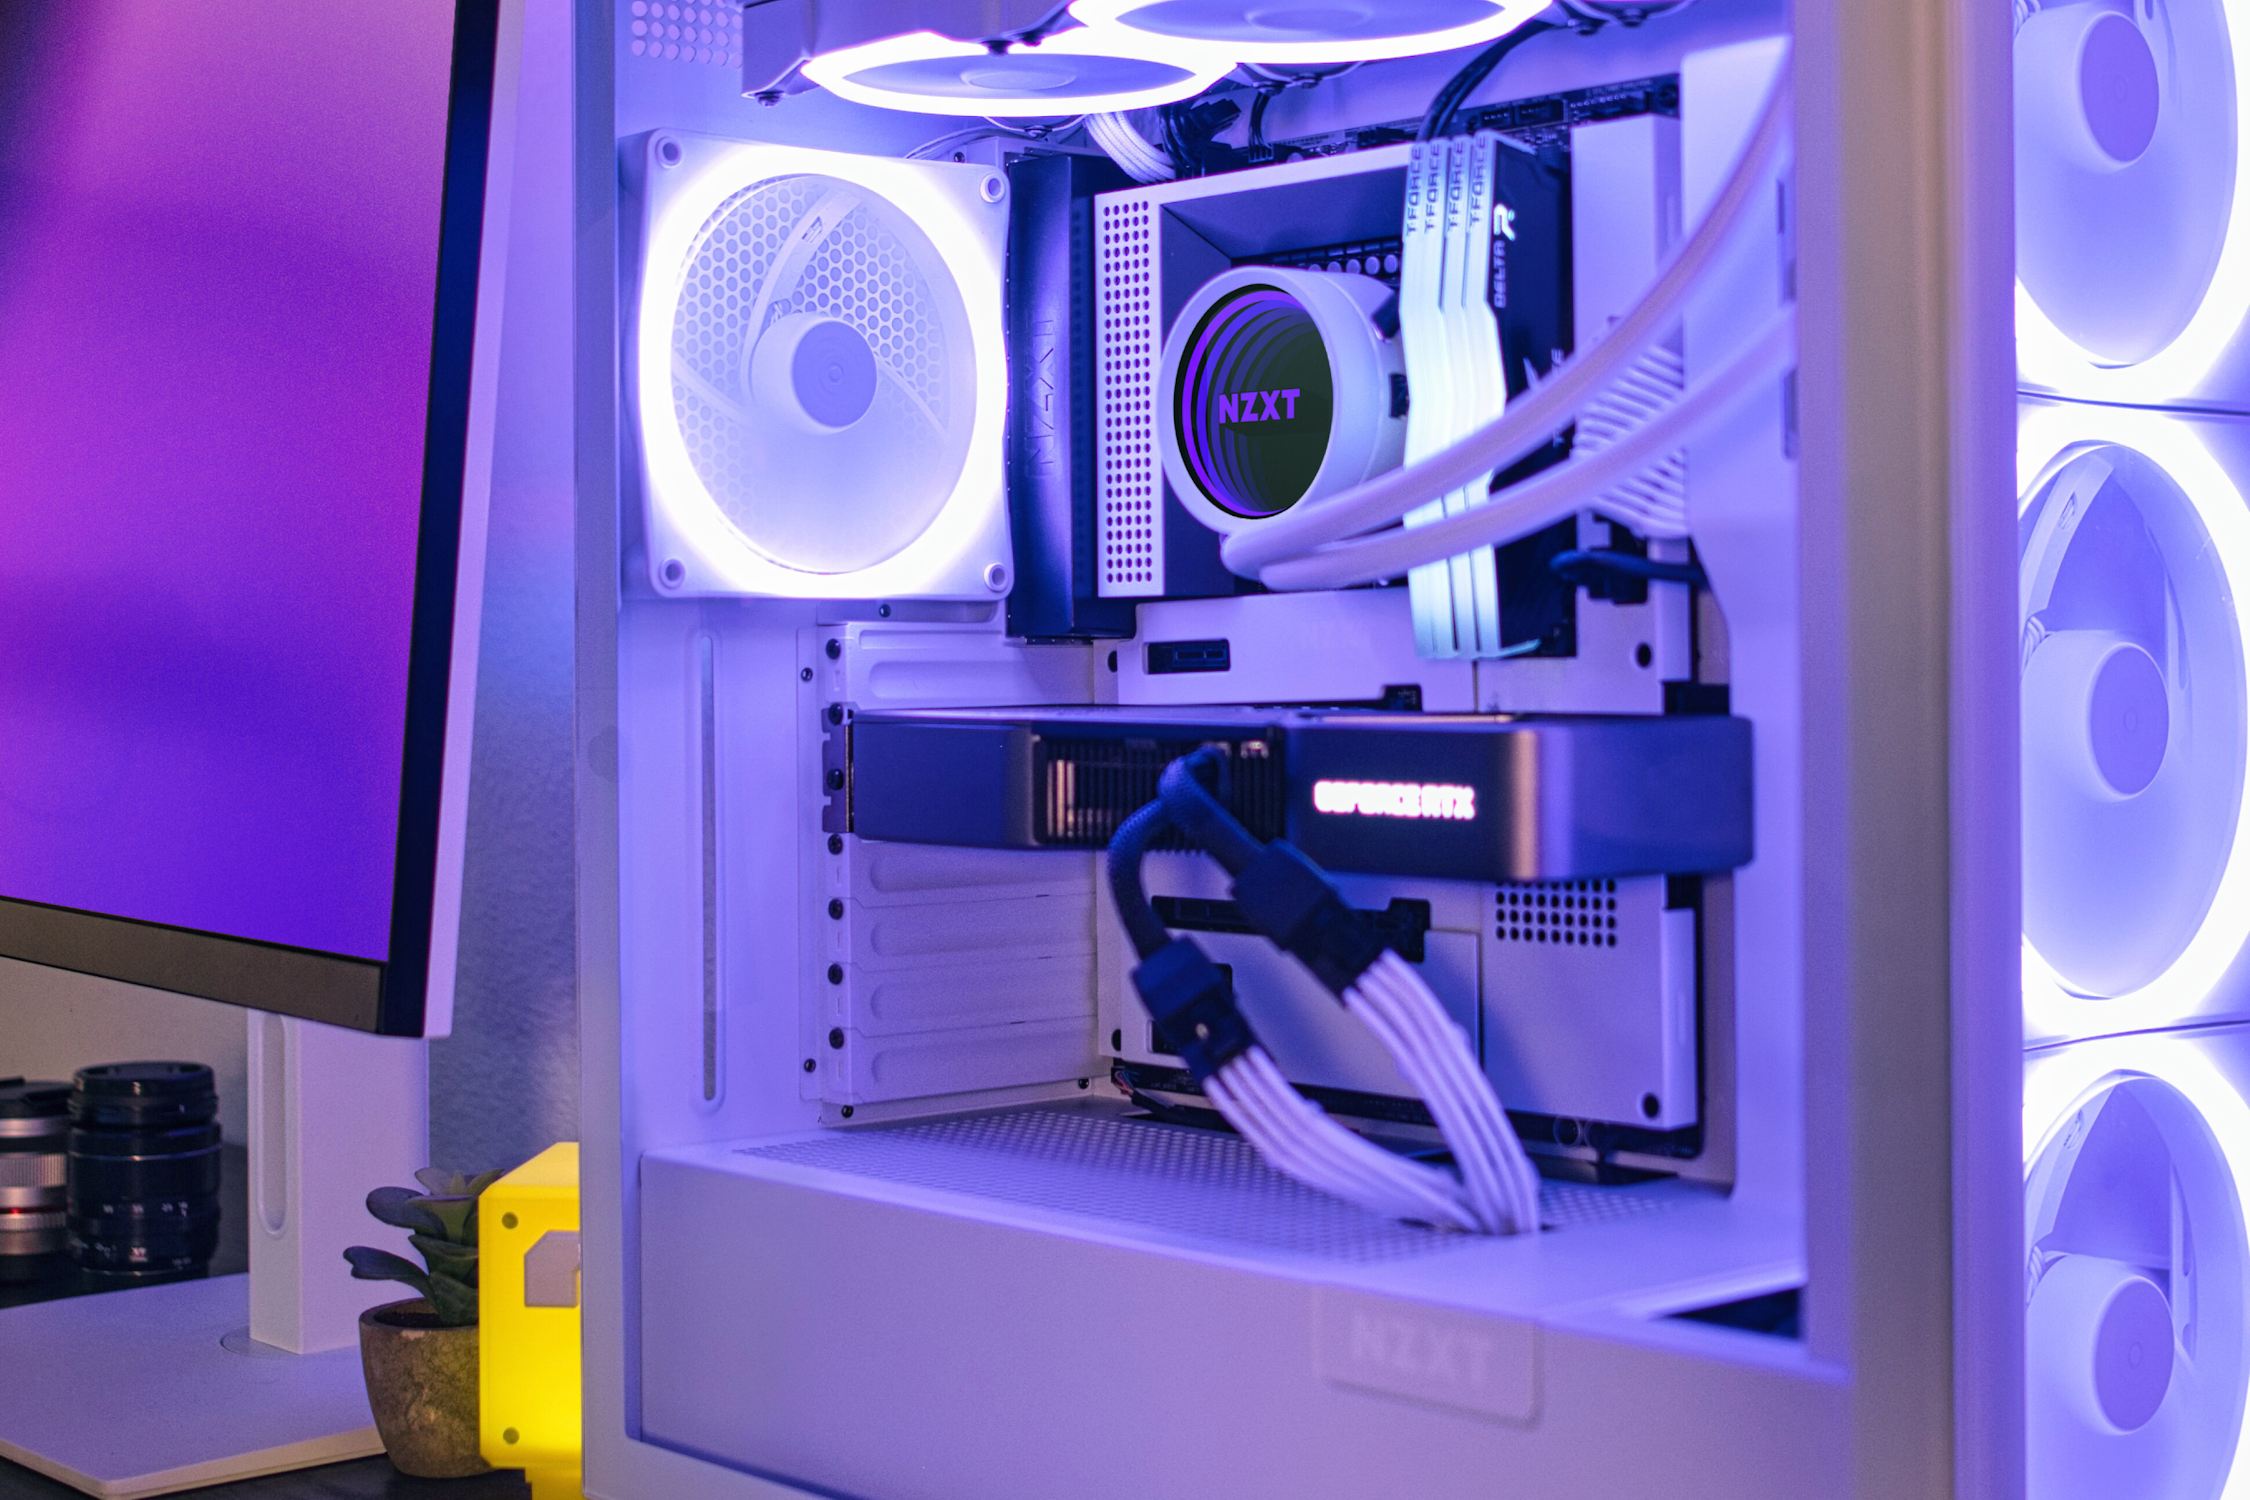 NZXT H7 Mid-Tower Case (White)